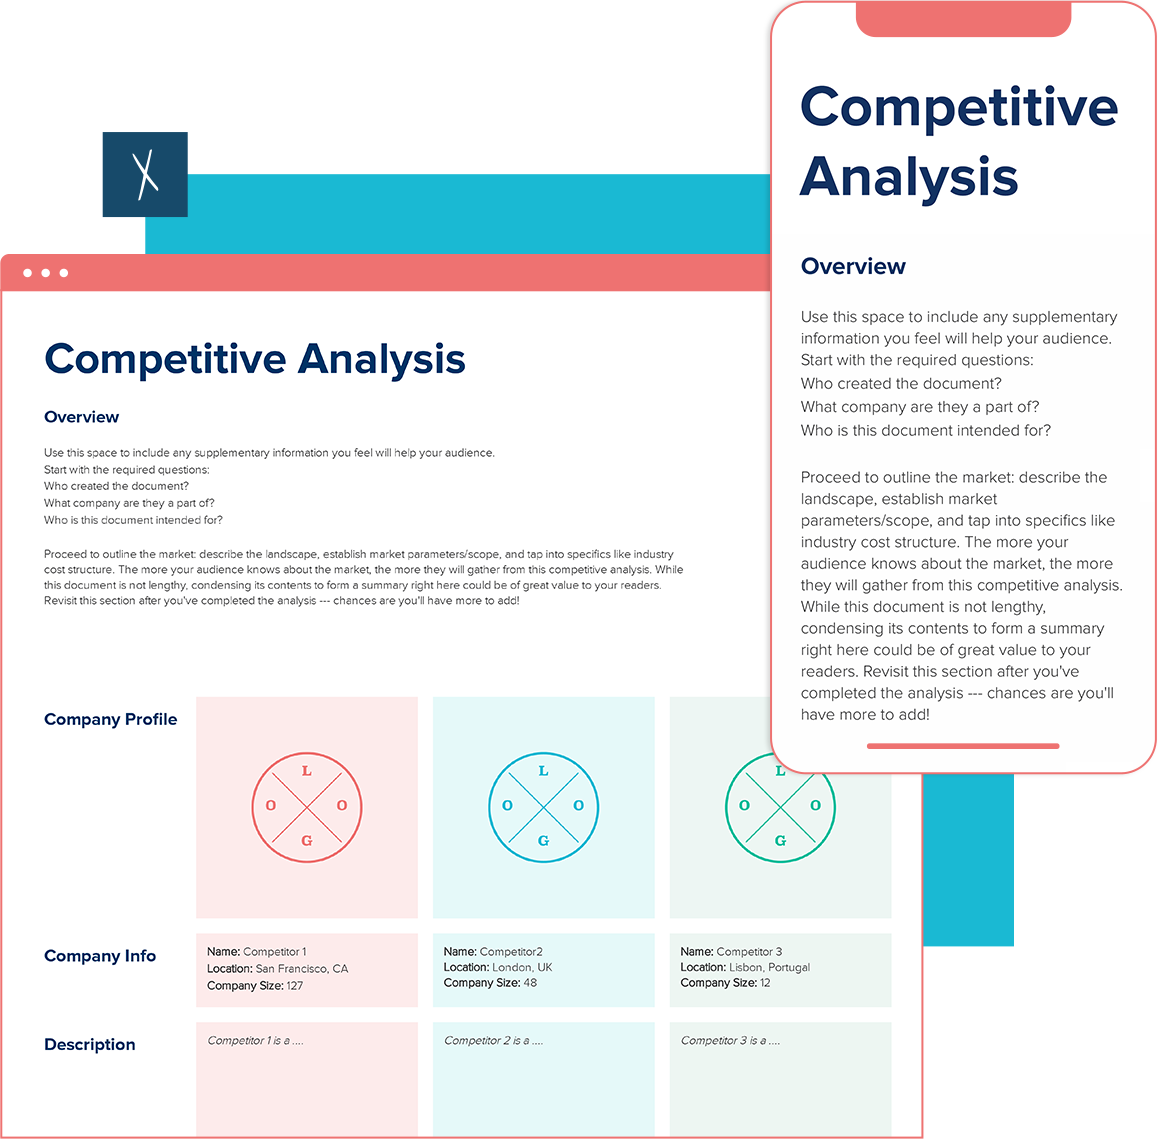 Competitive analysis Template | Desktop and Mobile Views